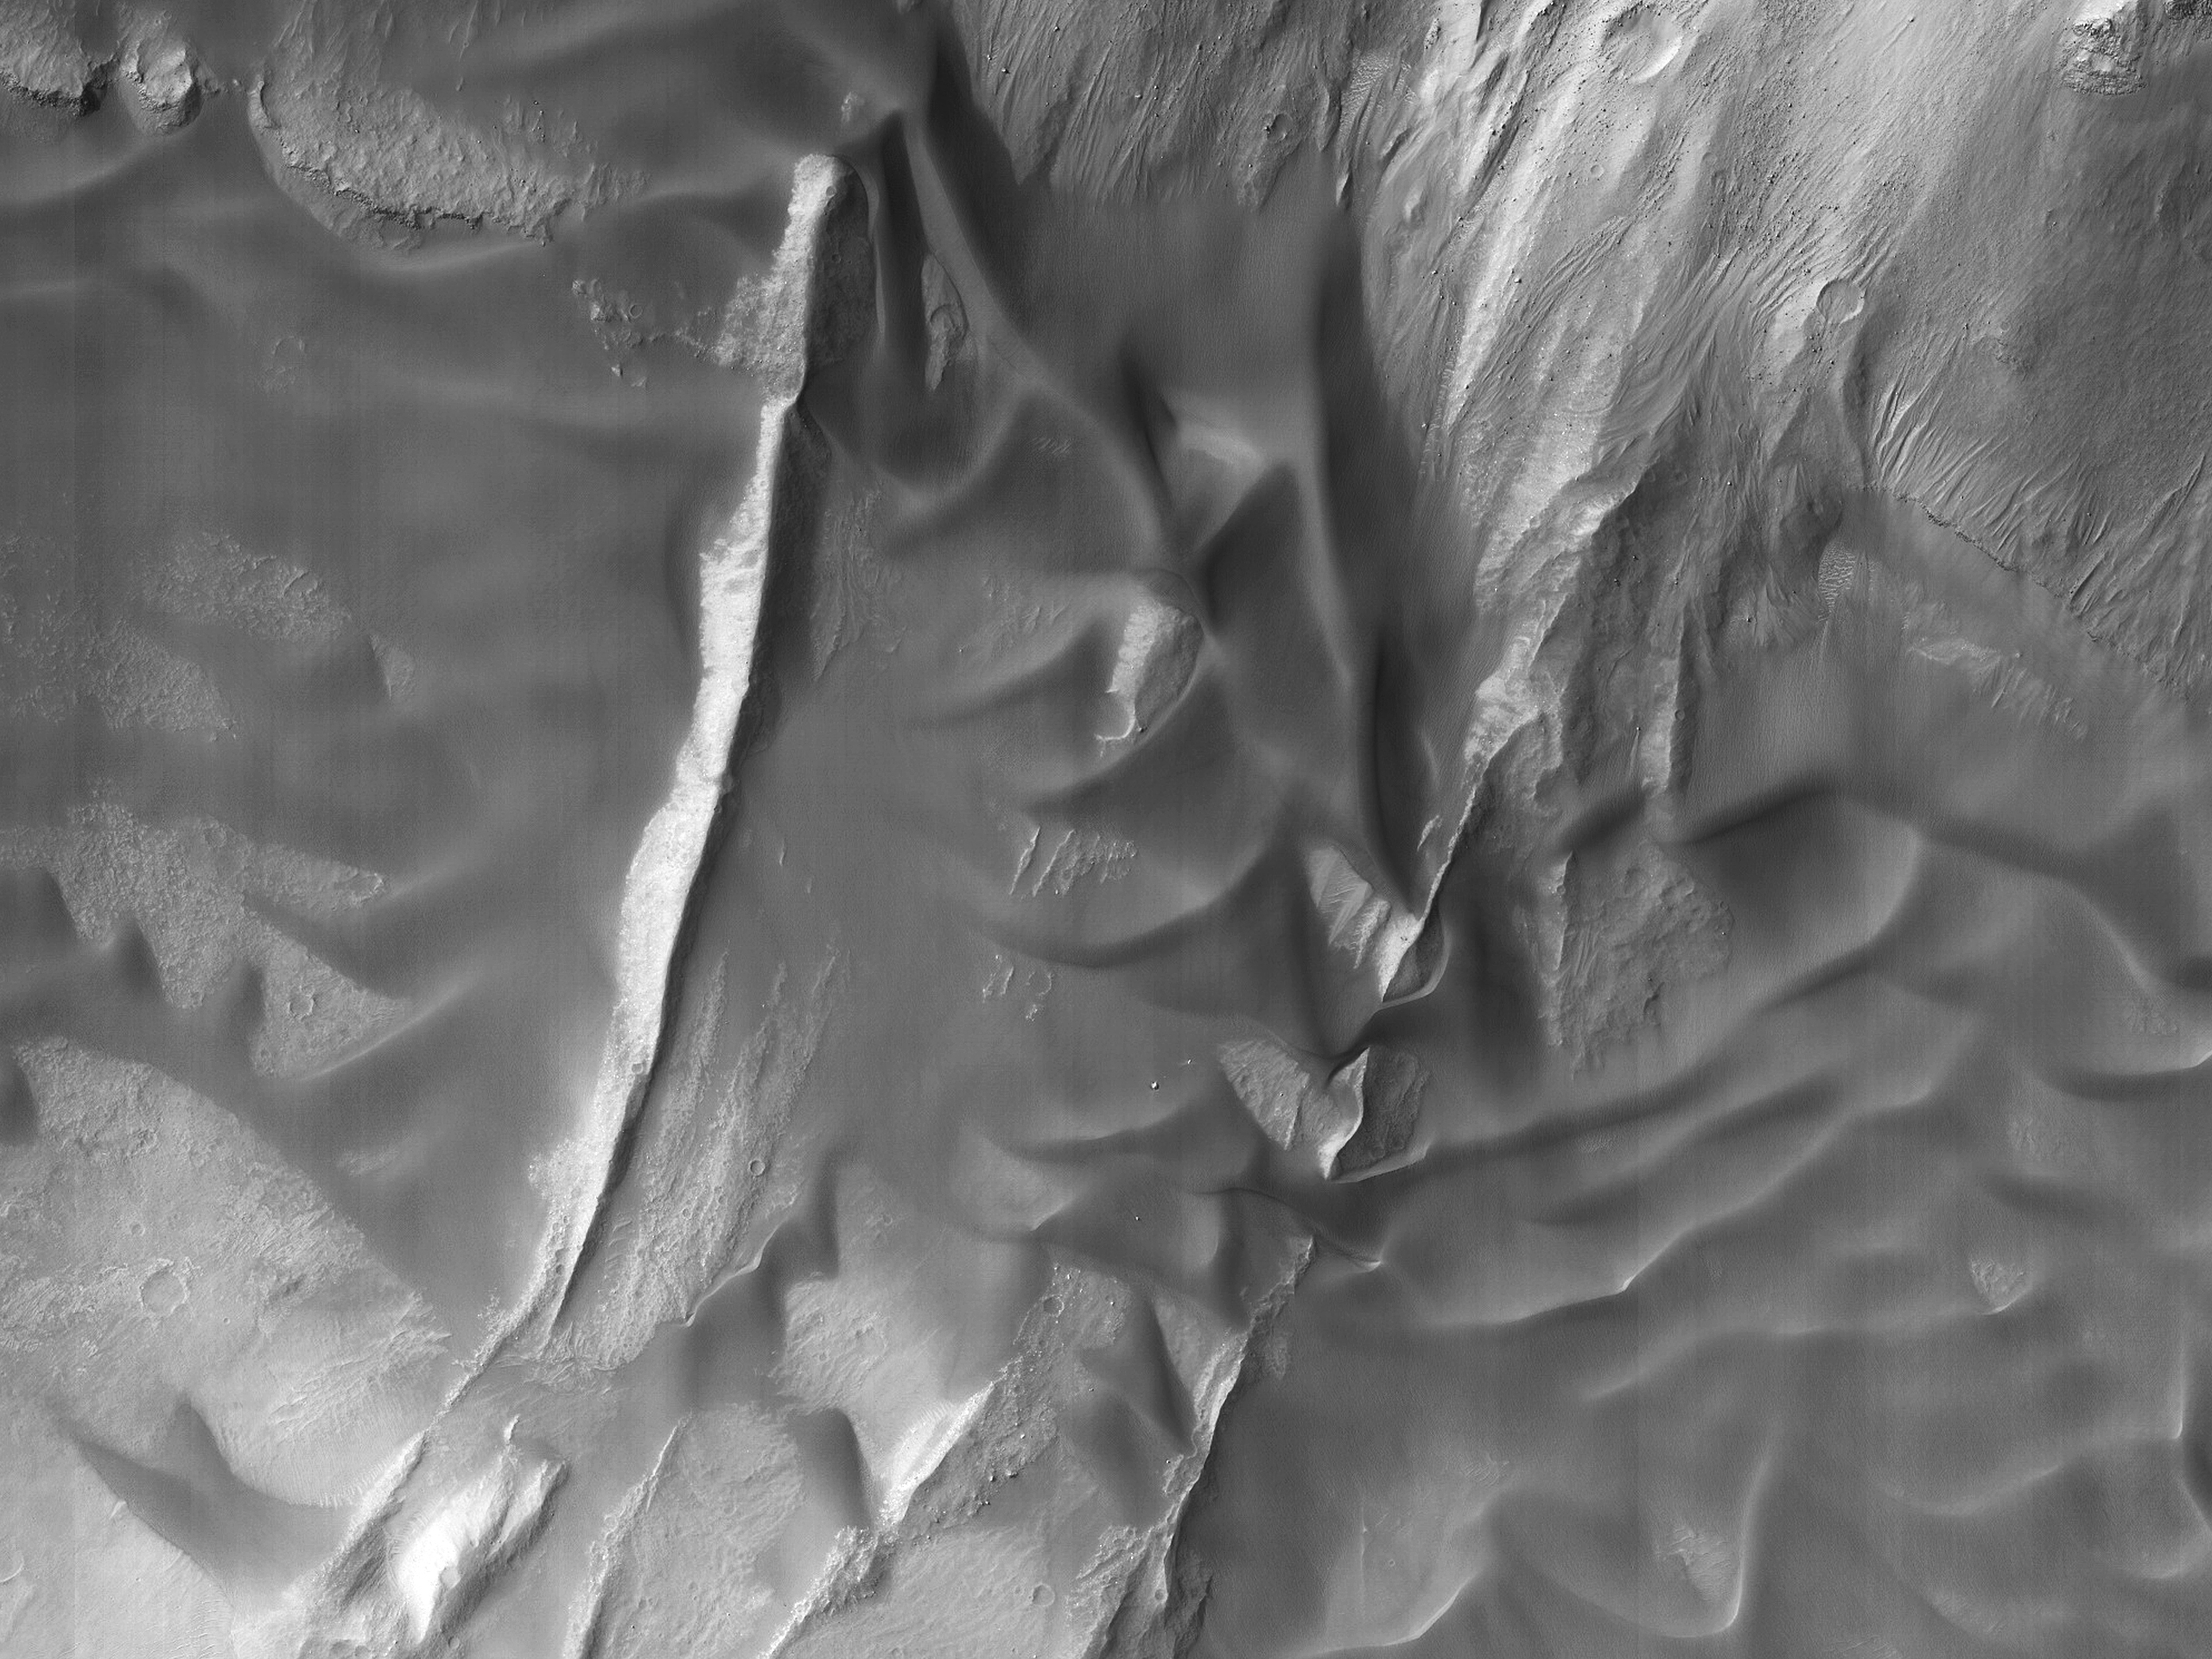 Slipping and Sliding in Coprates Chasma